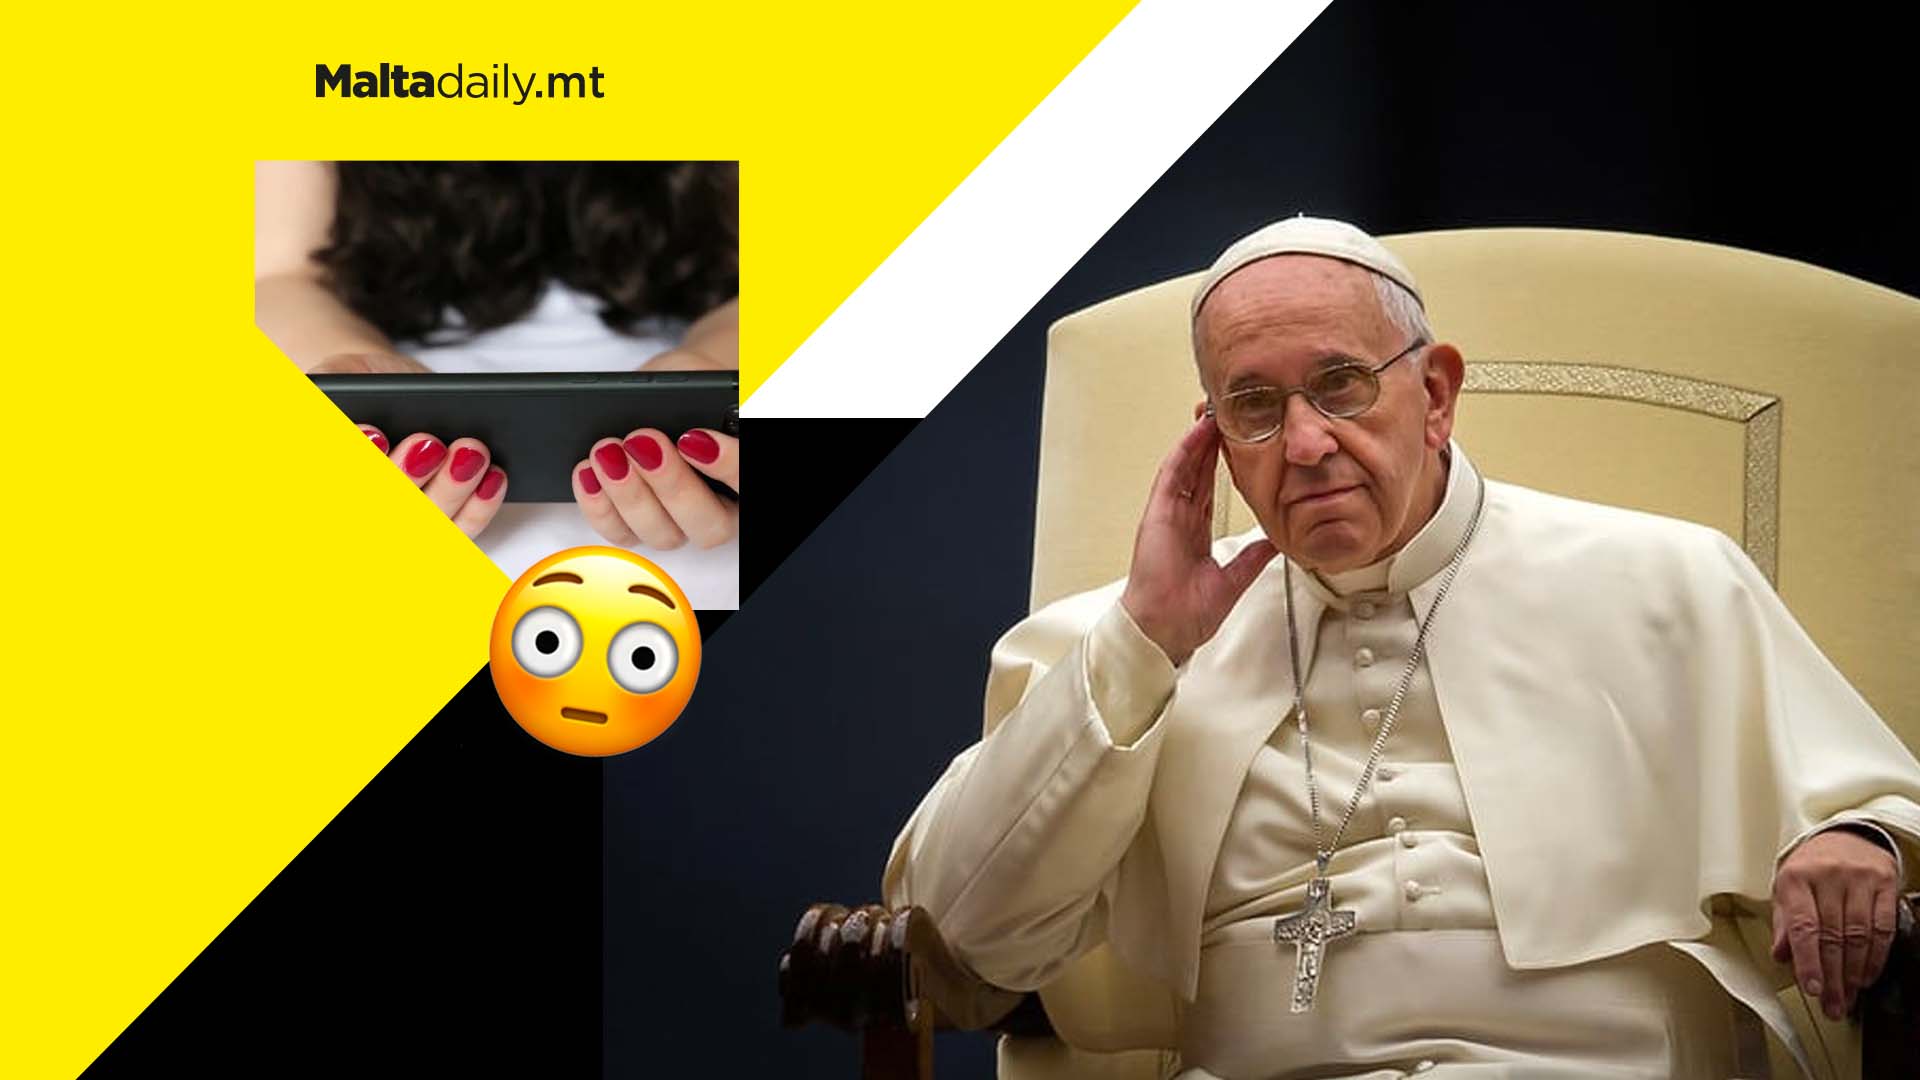 Nuns watch porn too says Pope Francis as he warns of risks